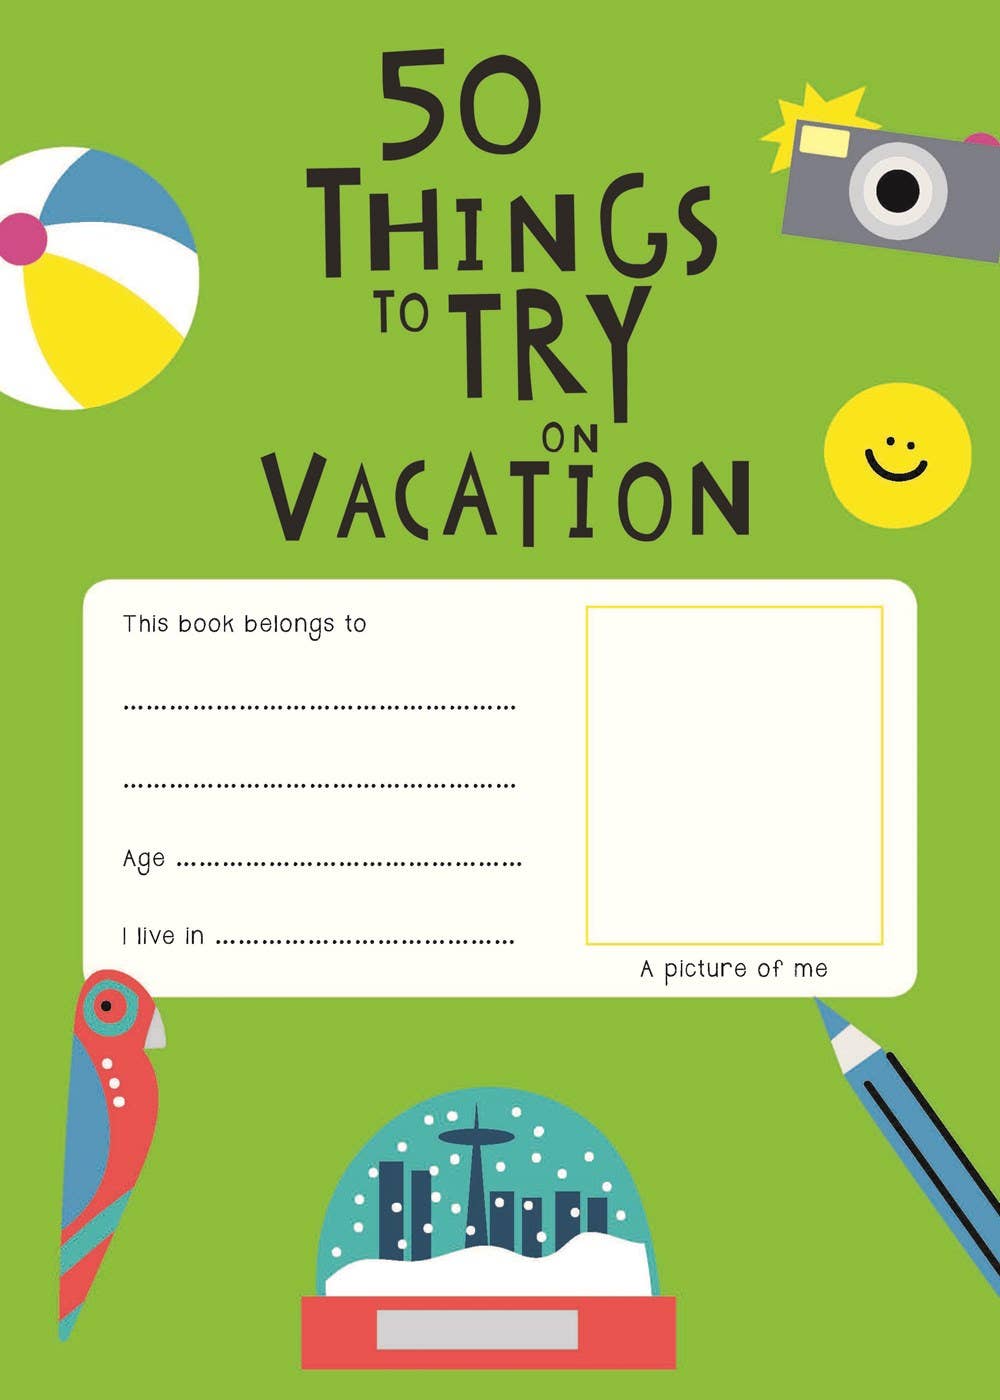 Gibbs Smith - Adventure Journal: 50 Things to Try on Vacation